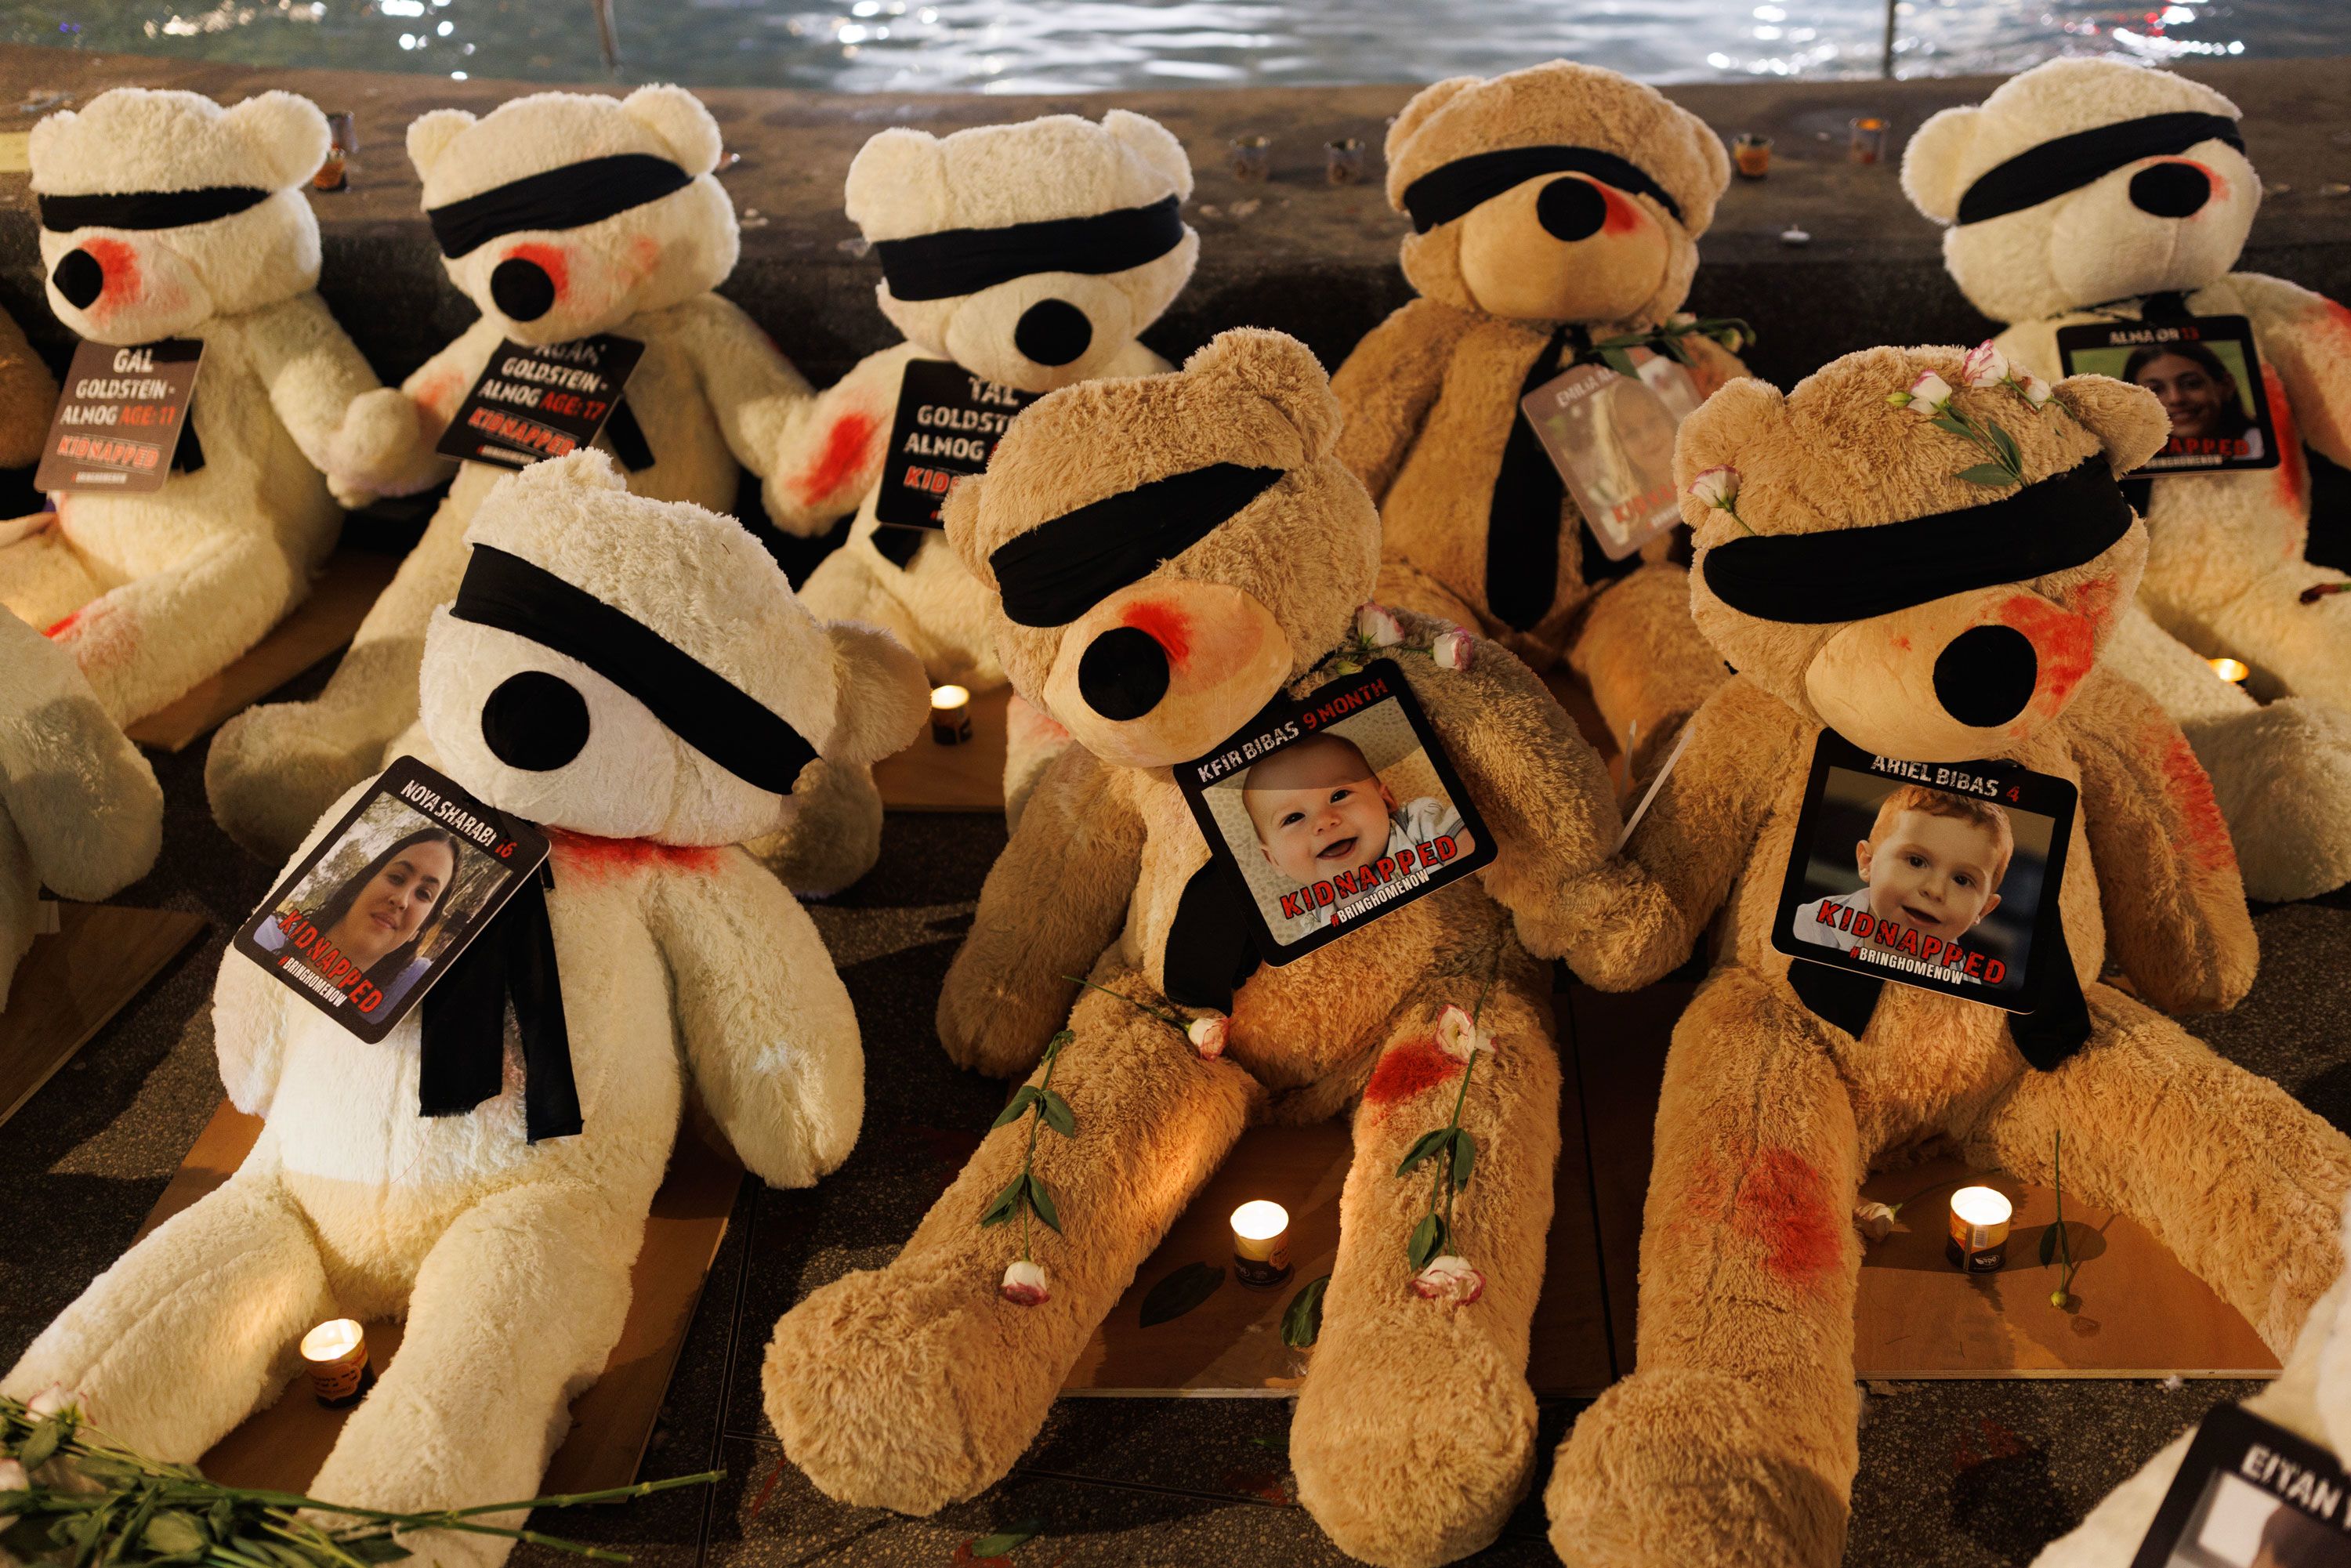 Teddy bears with their eyes covered and showing signs of injury are displayed to highlight the young children and babies currently missing, believed to be being held hostage by Hamas, on October 27 in Tel Aviv, Israel.